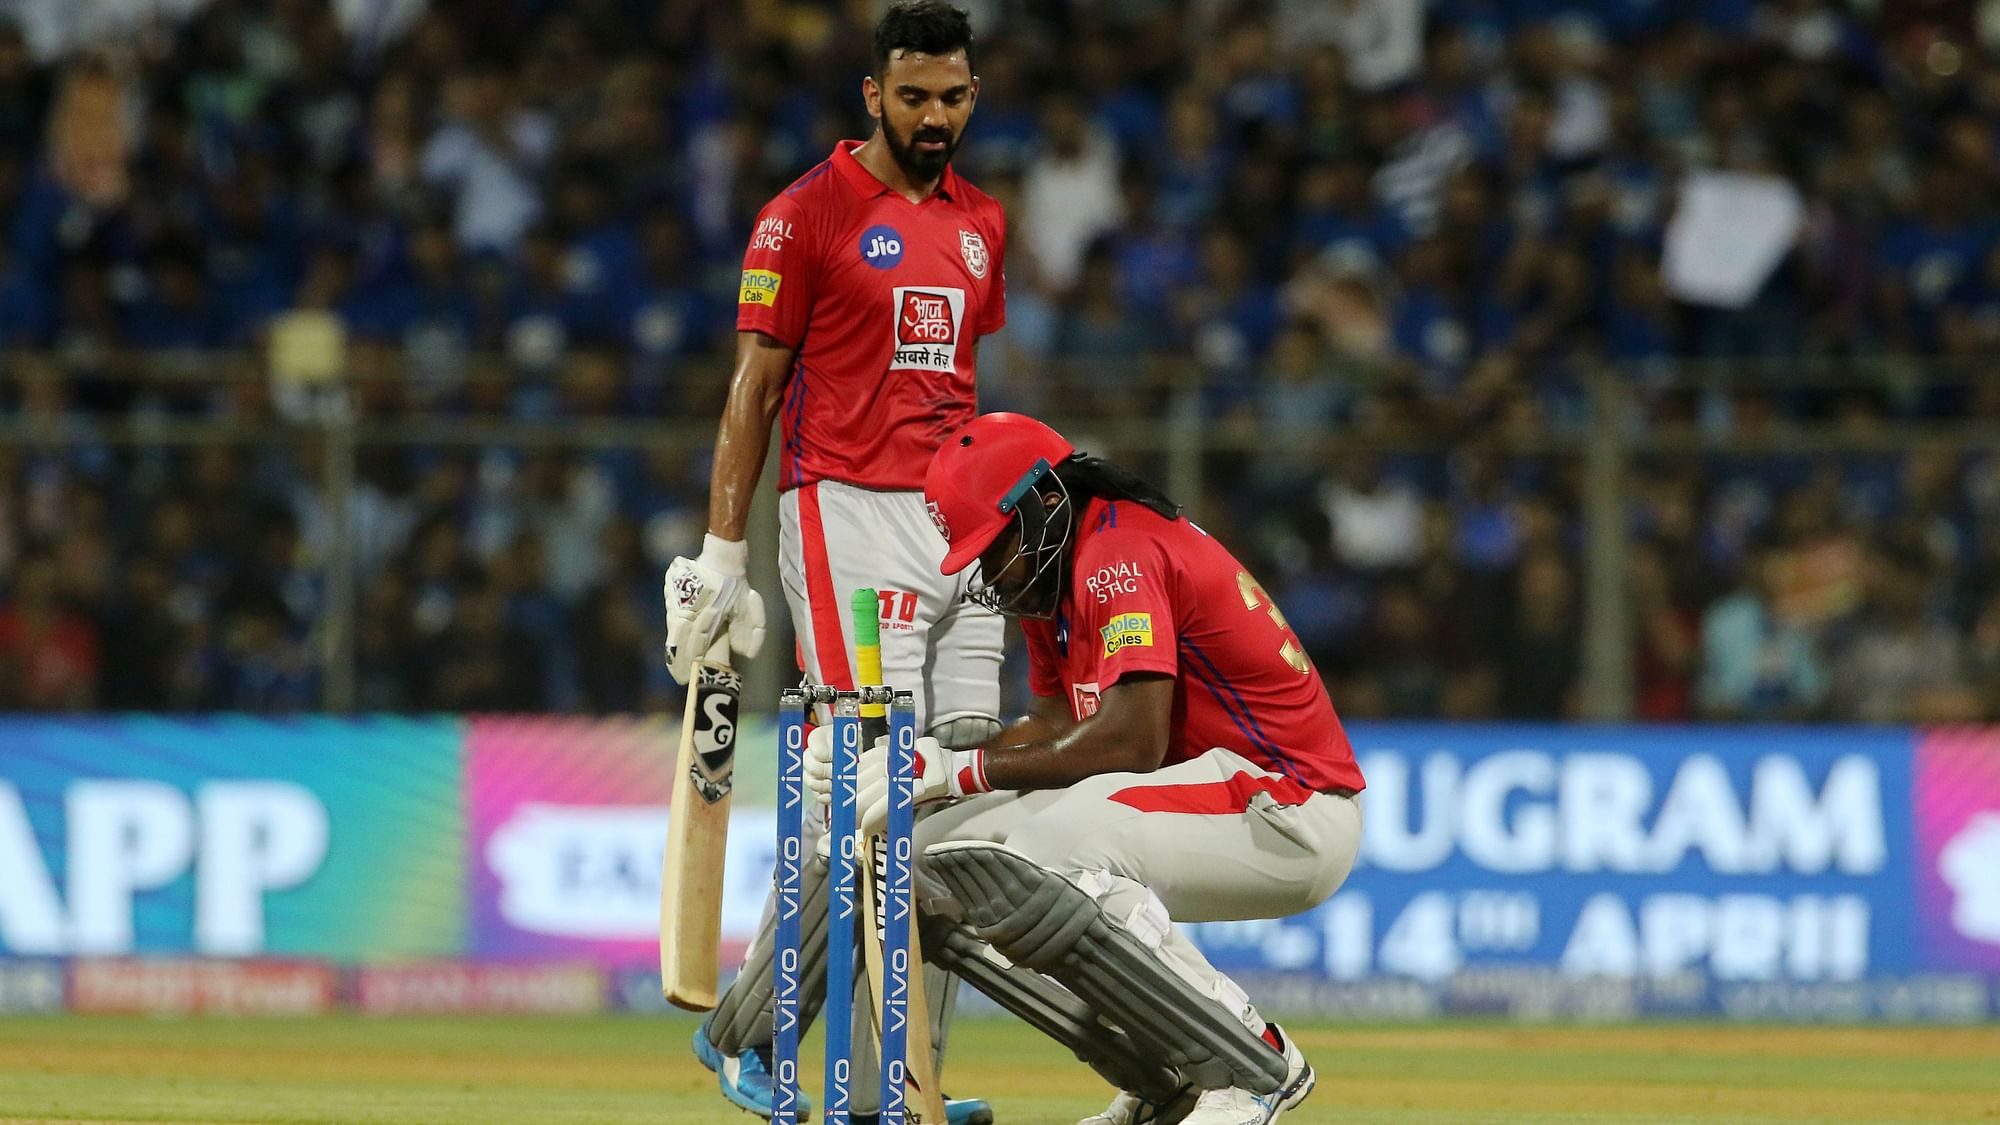 Chris Gayle did not take the field during Mumbai Indians’ successful run.